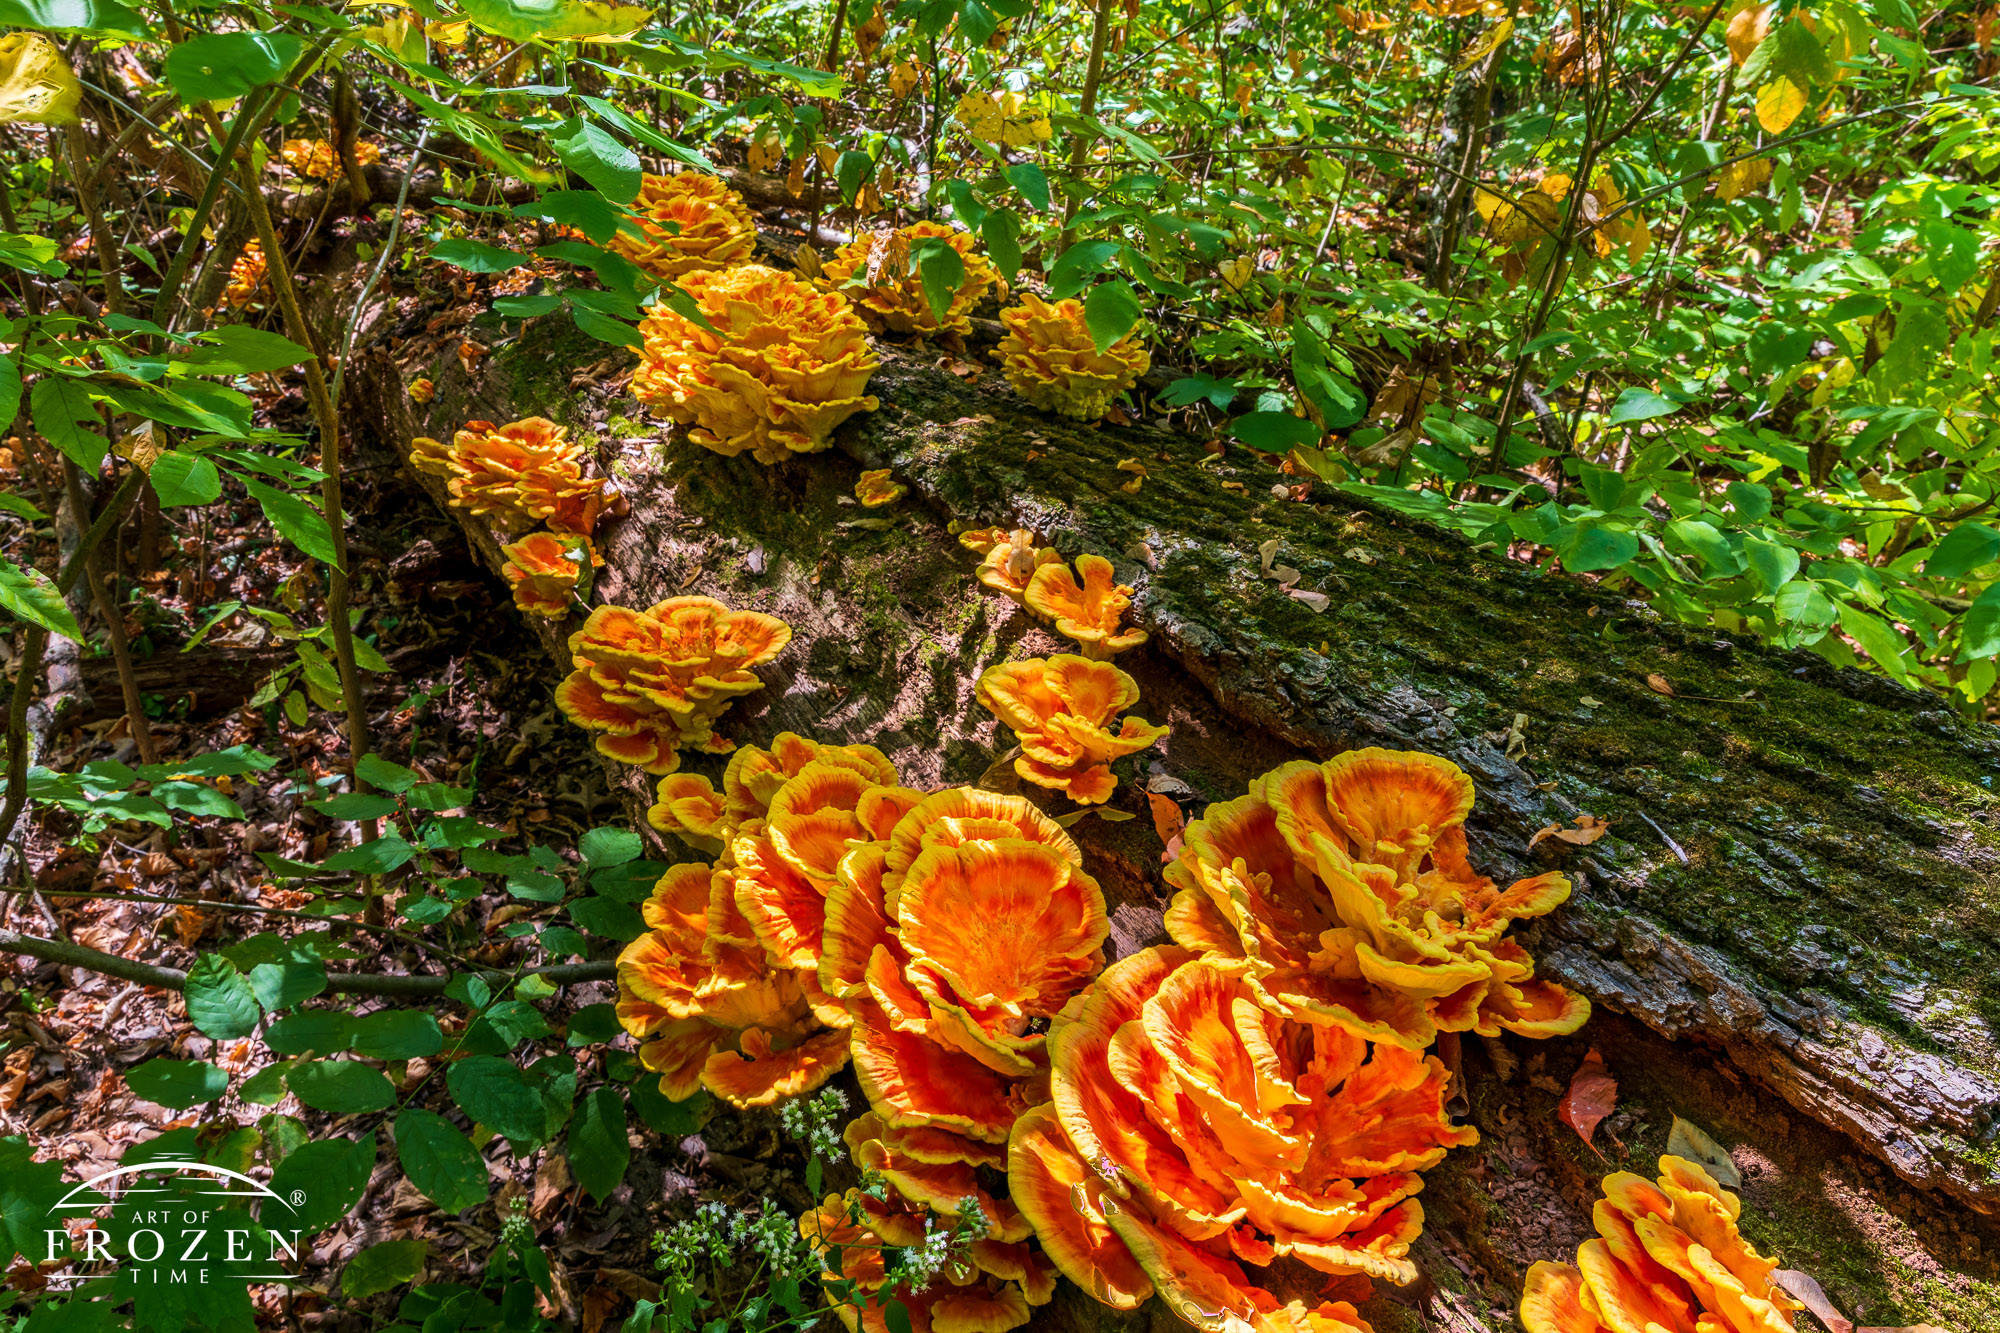 A surprisingly colorful fungus growing on a fallen tree which displays large bright orange and yellow shelves